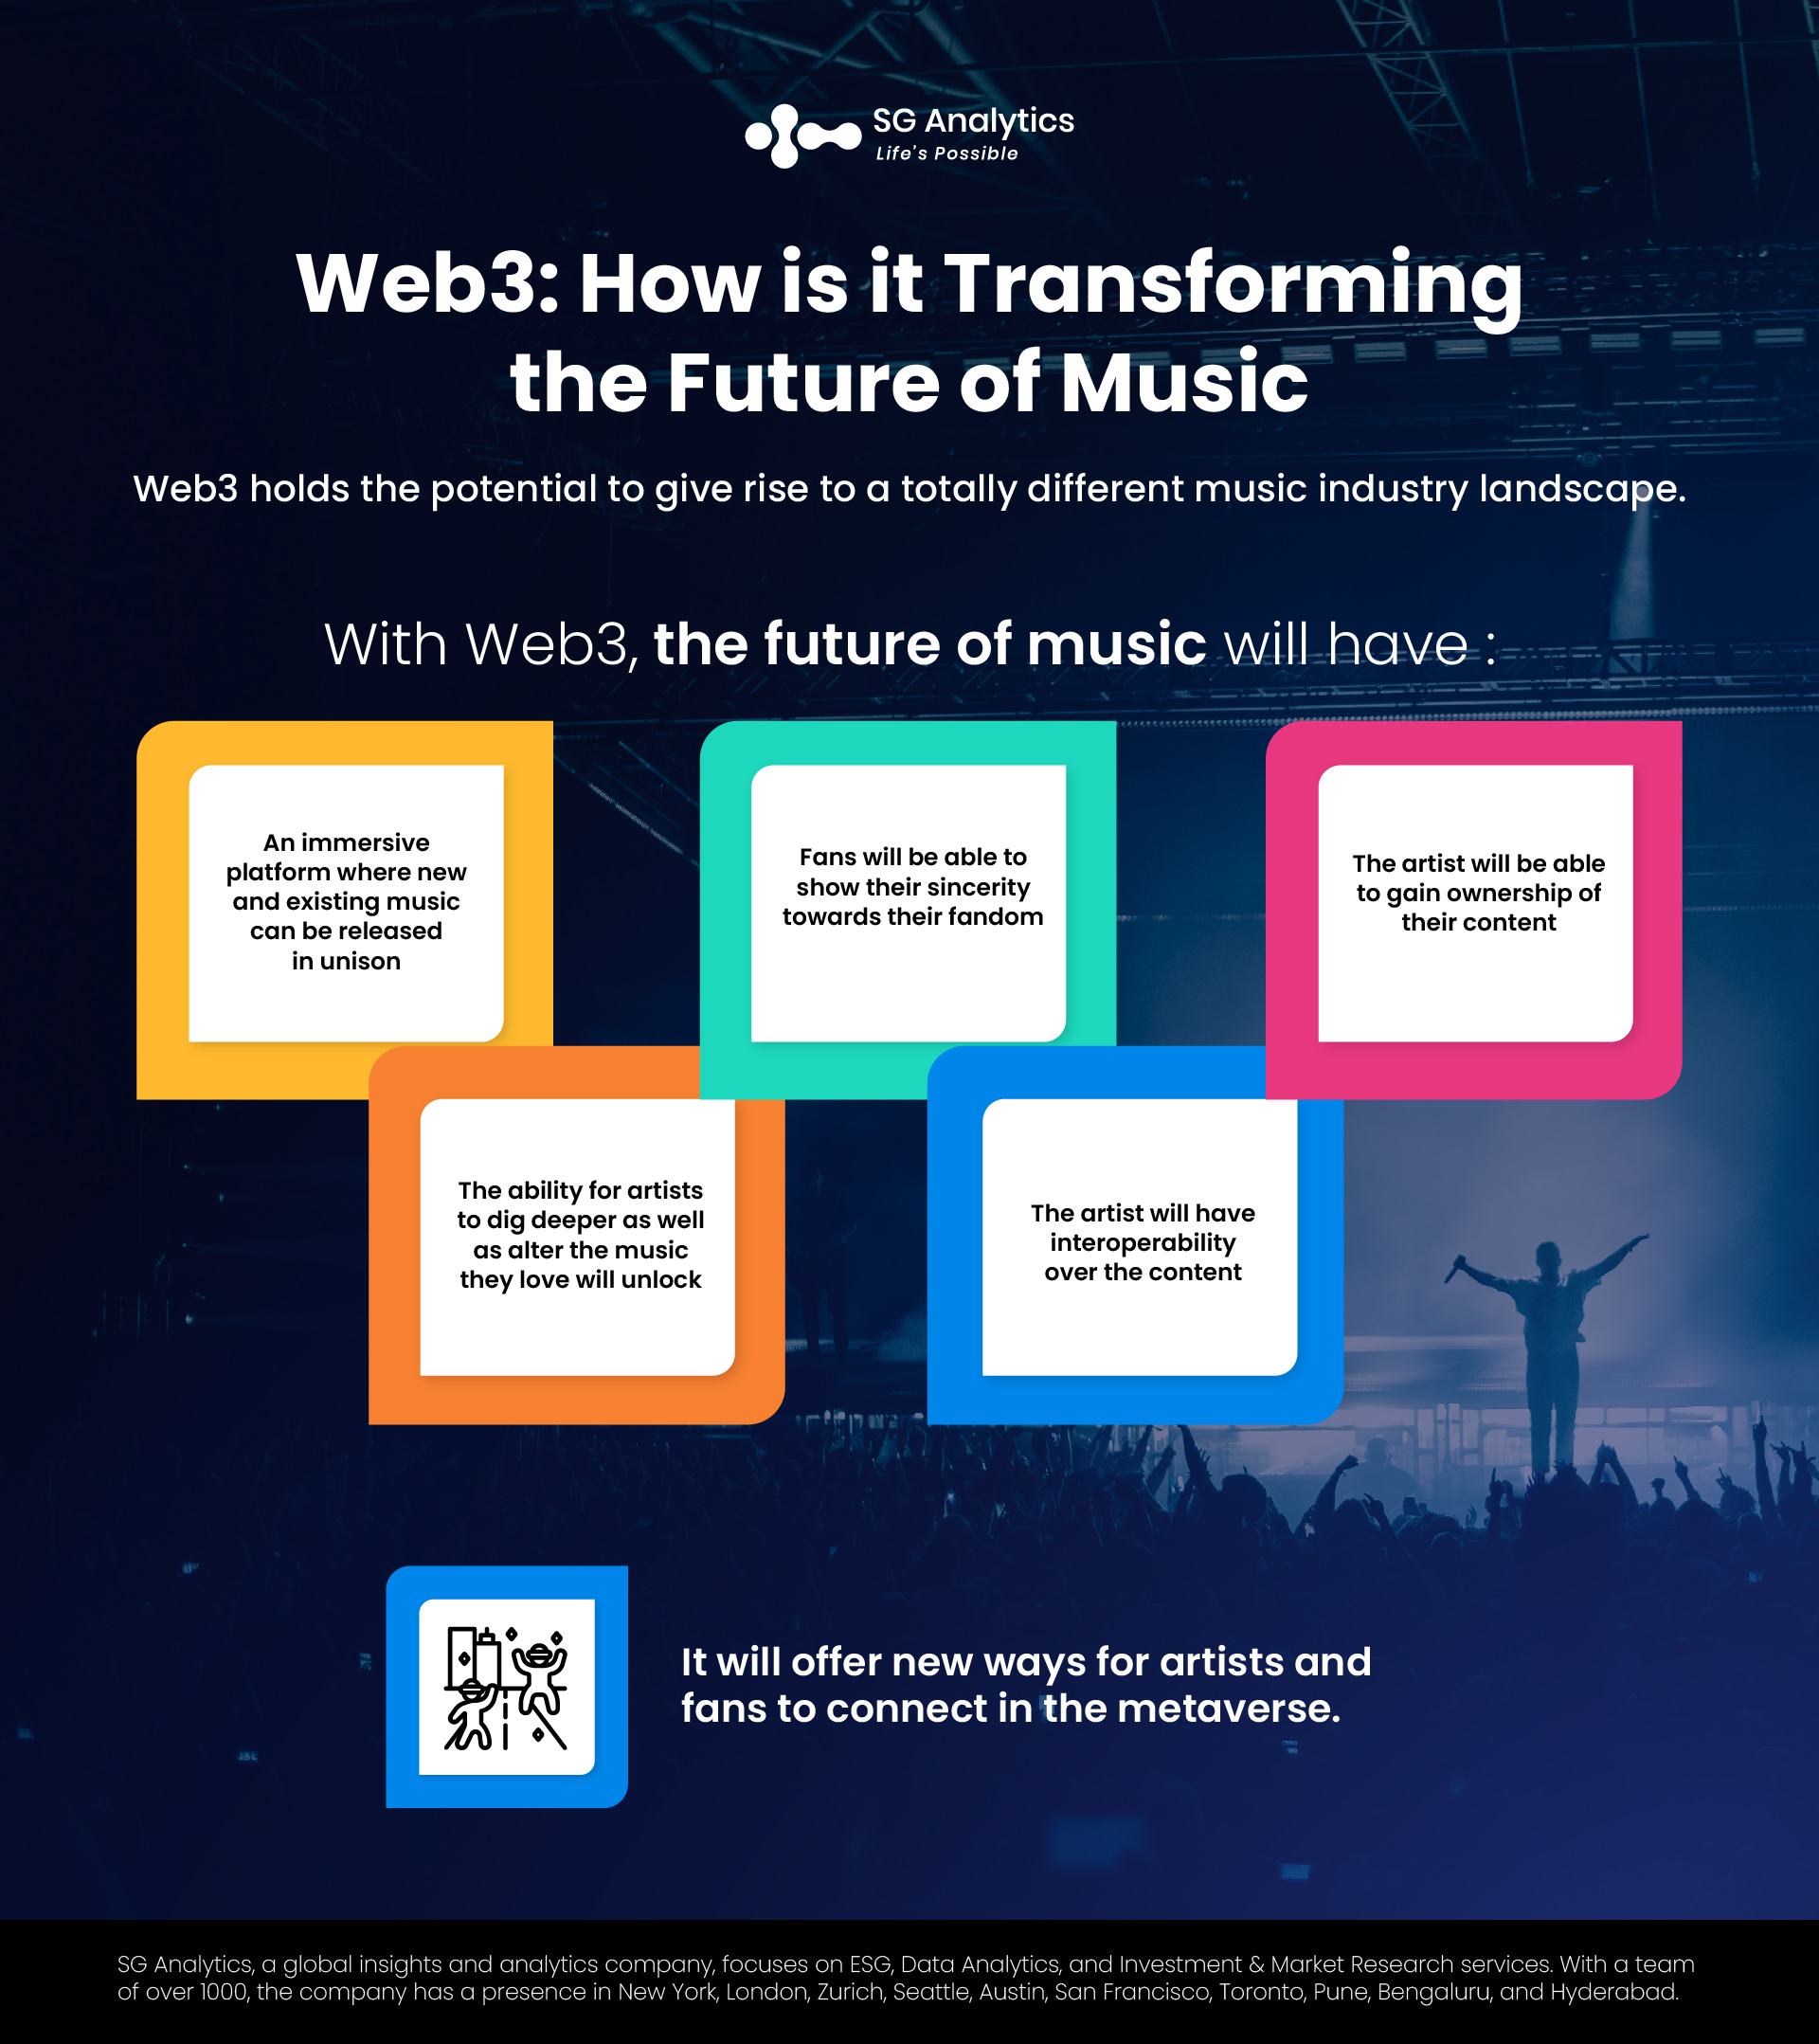 SG Analytics_Web3 How is it Transforming the Future of Music